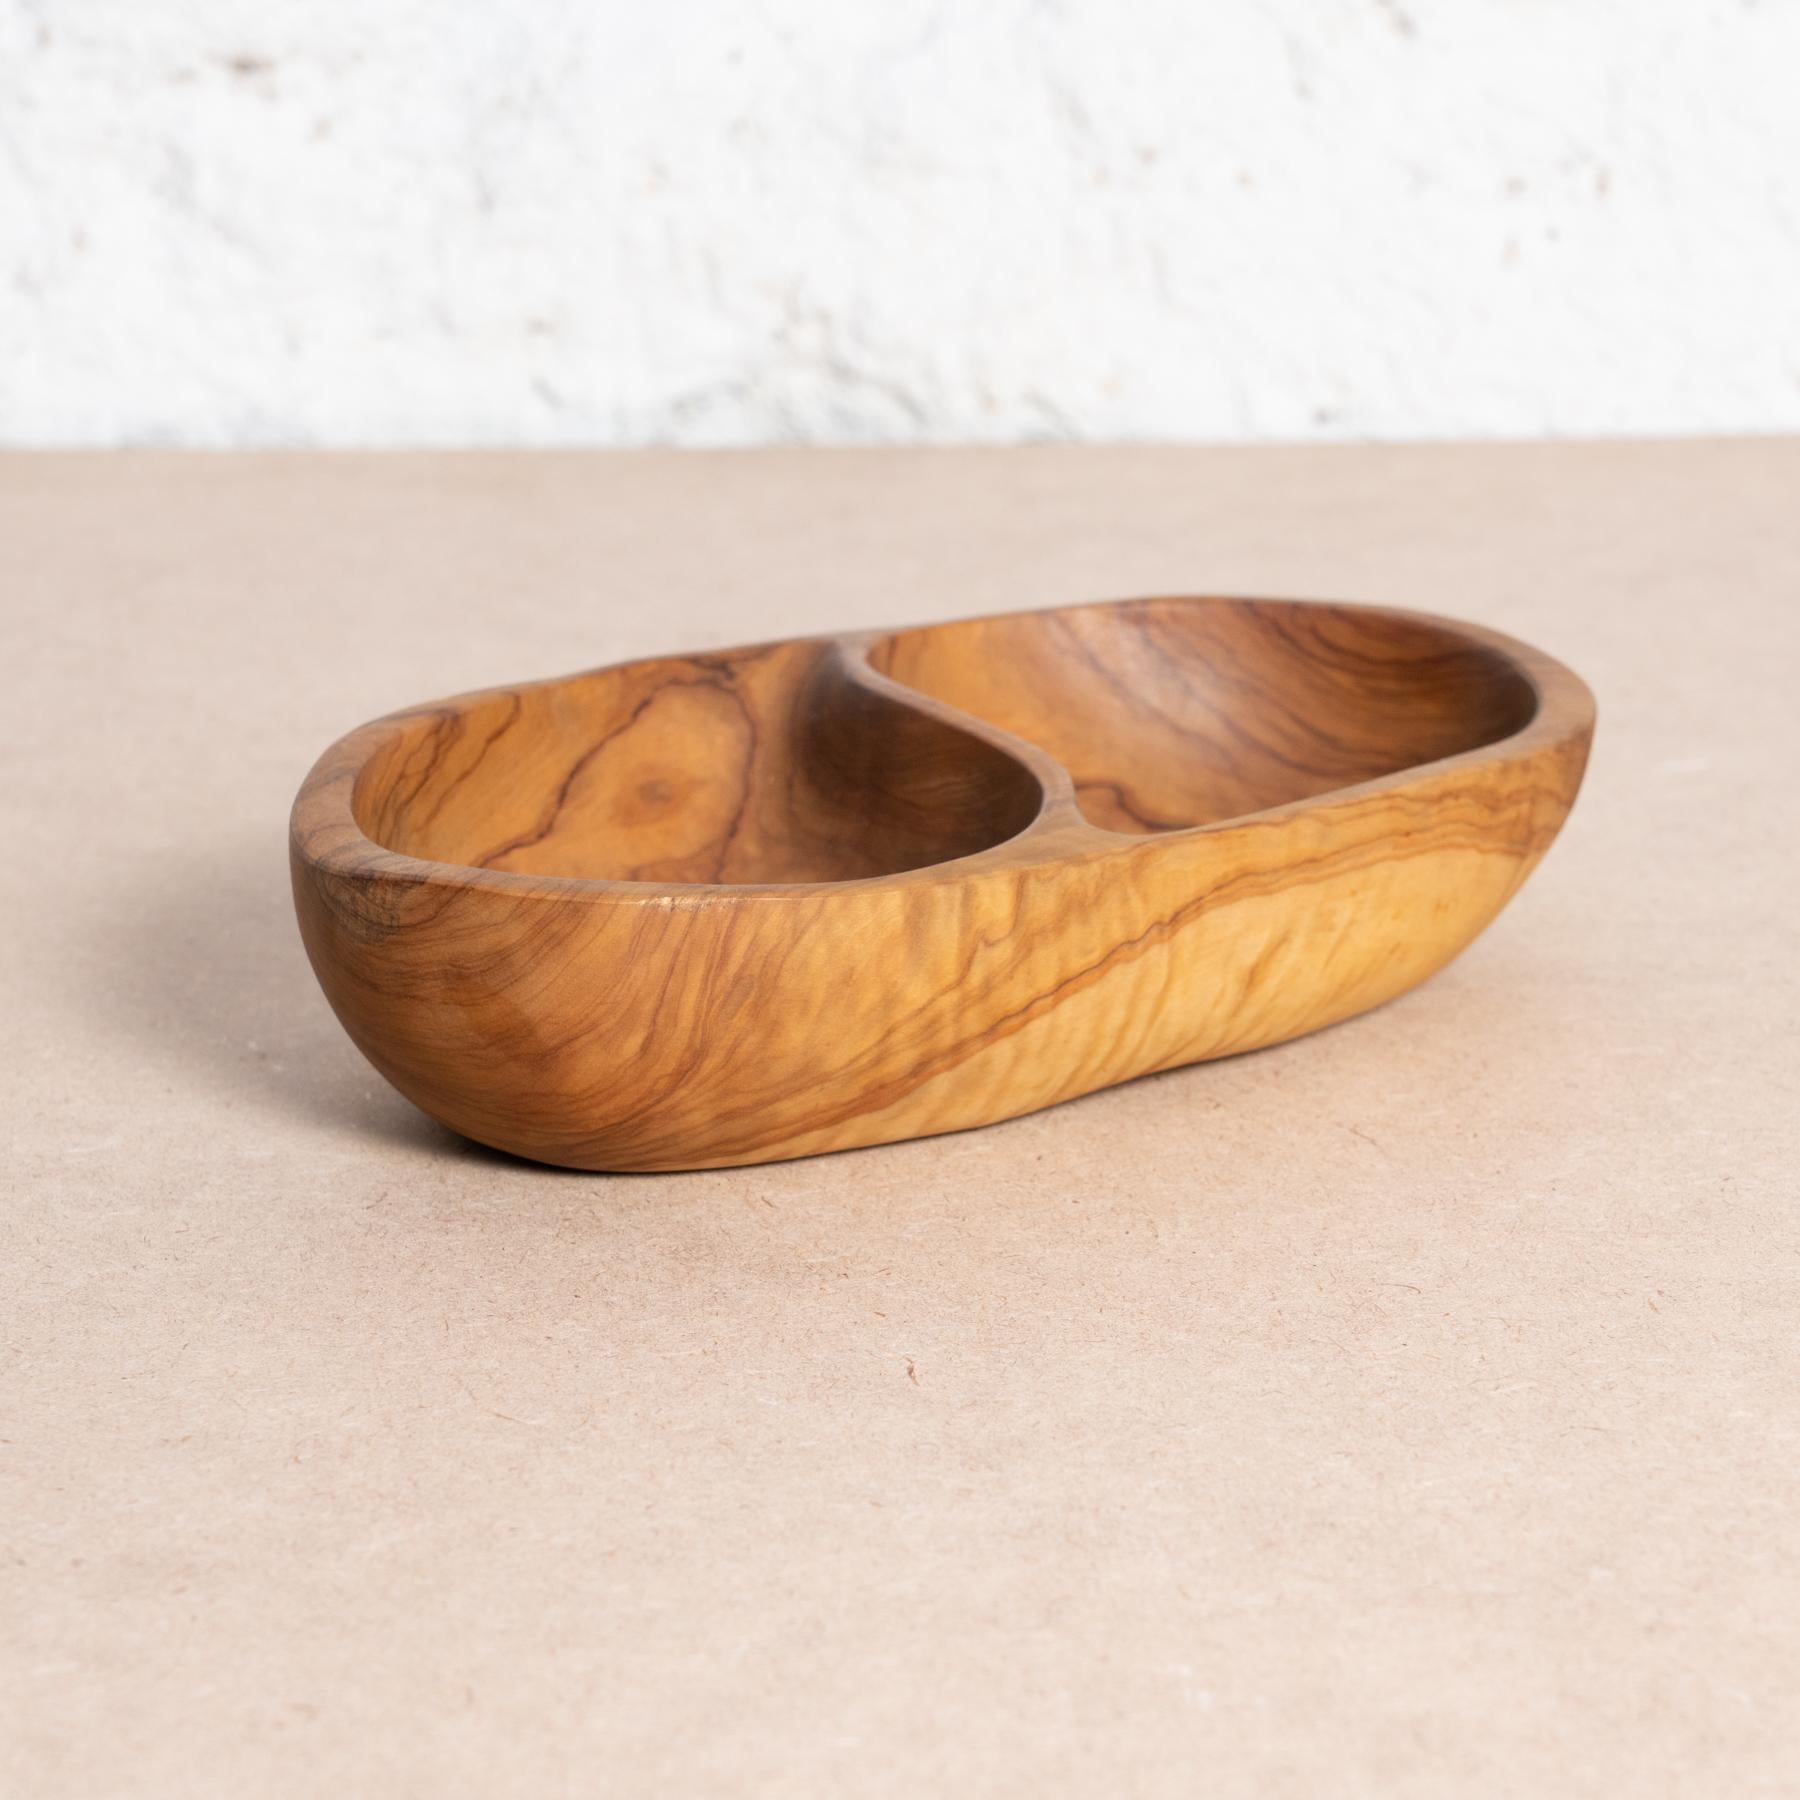 Handmade bowl manufactured in olive wood.

By Creaciones Fimfa in Spain.

Signed

In good original condition with minor wear consistent with age and use, preserving a beautiful patina.



